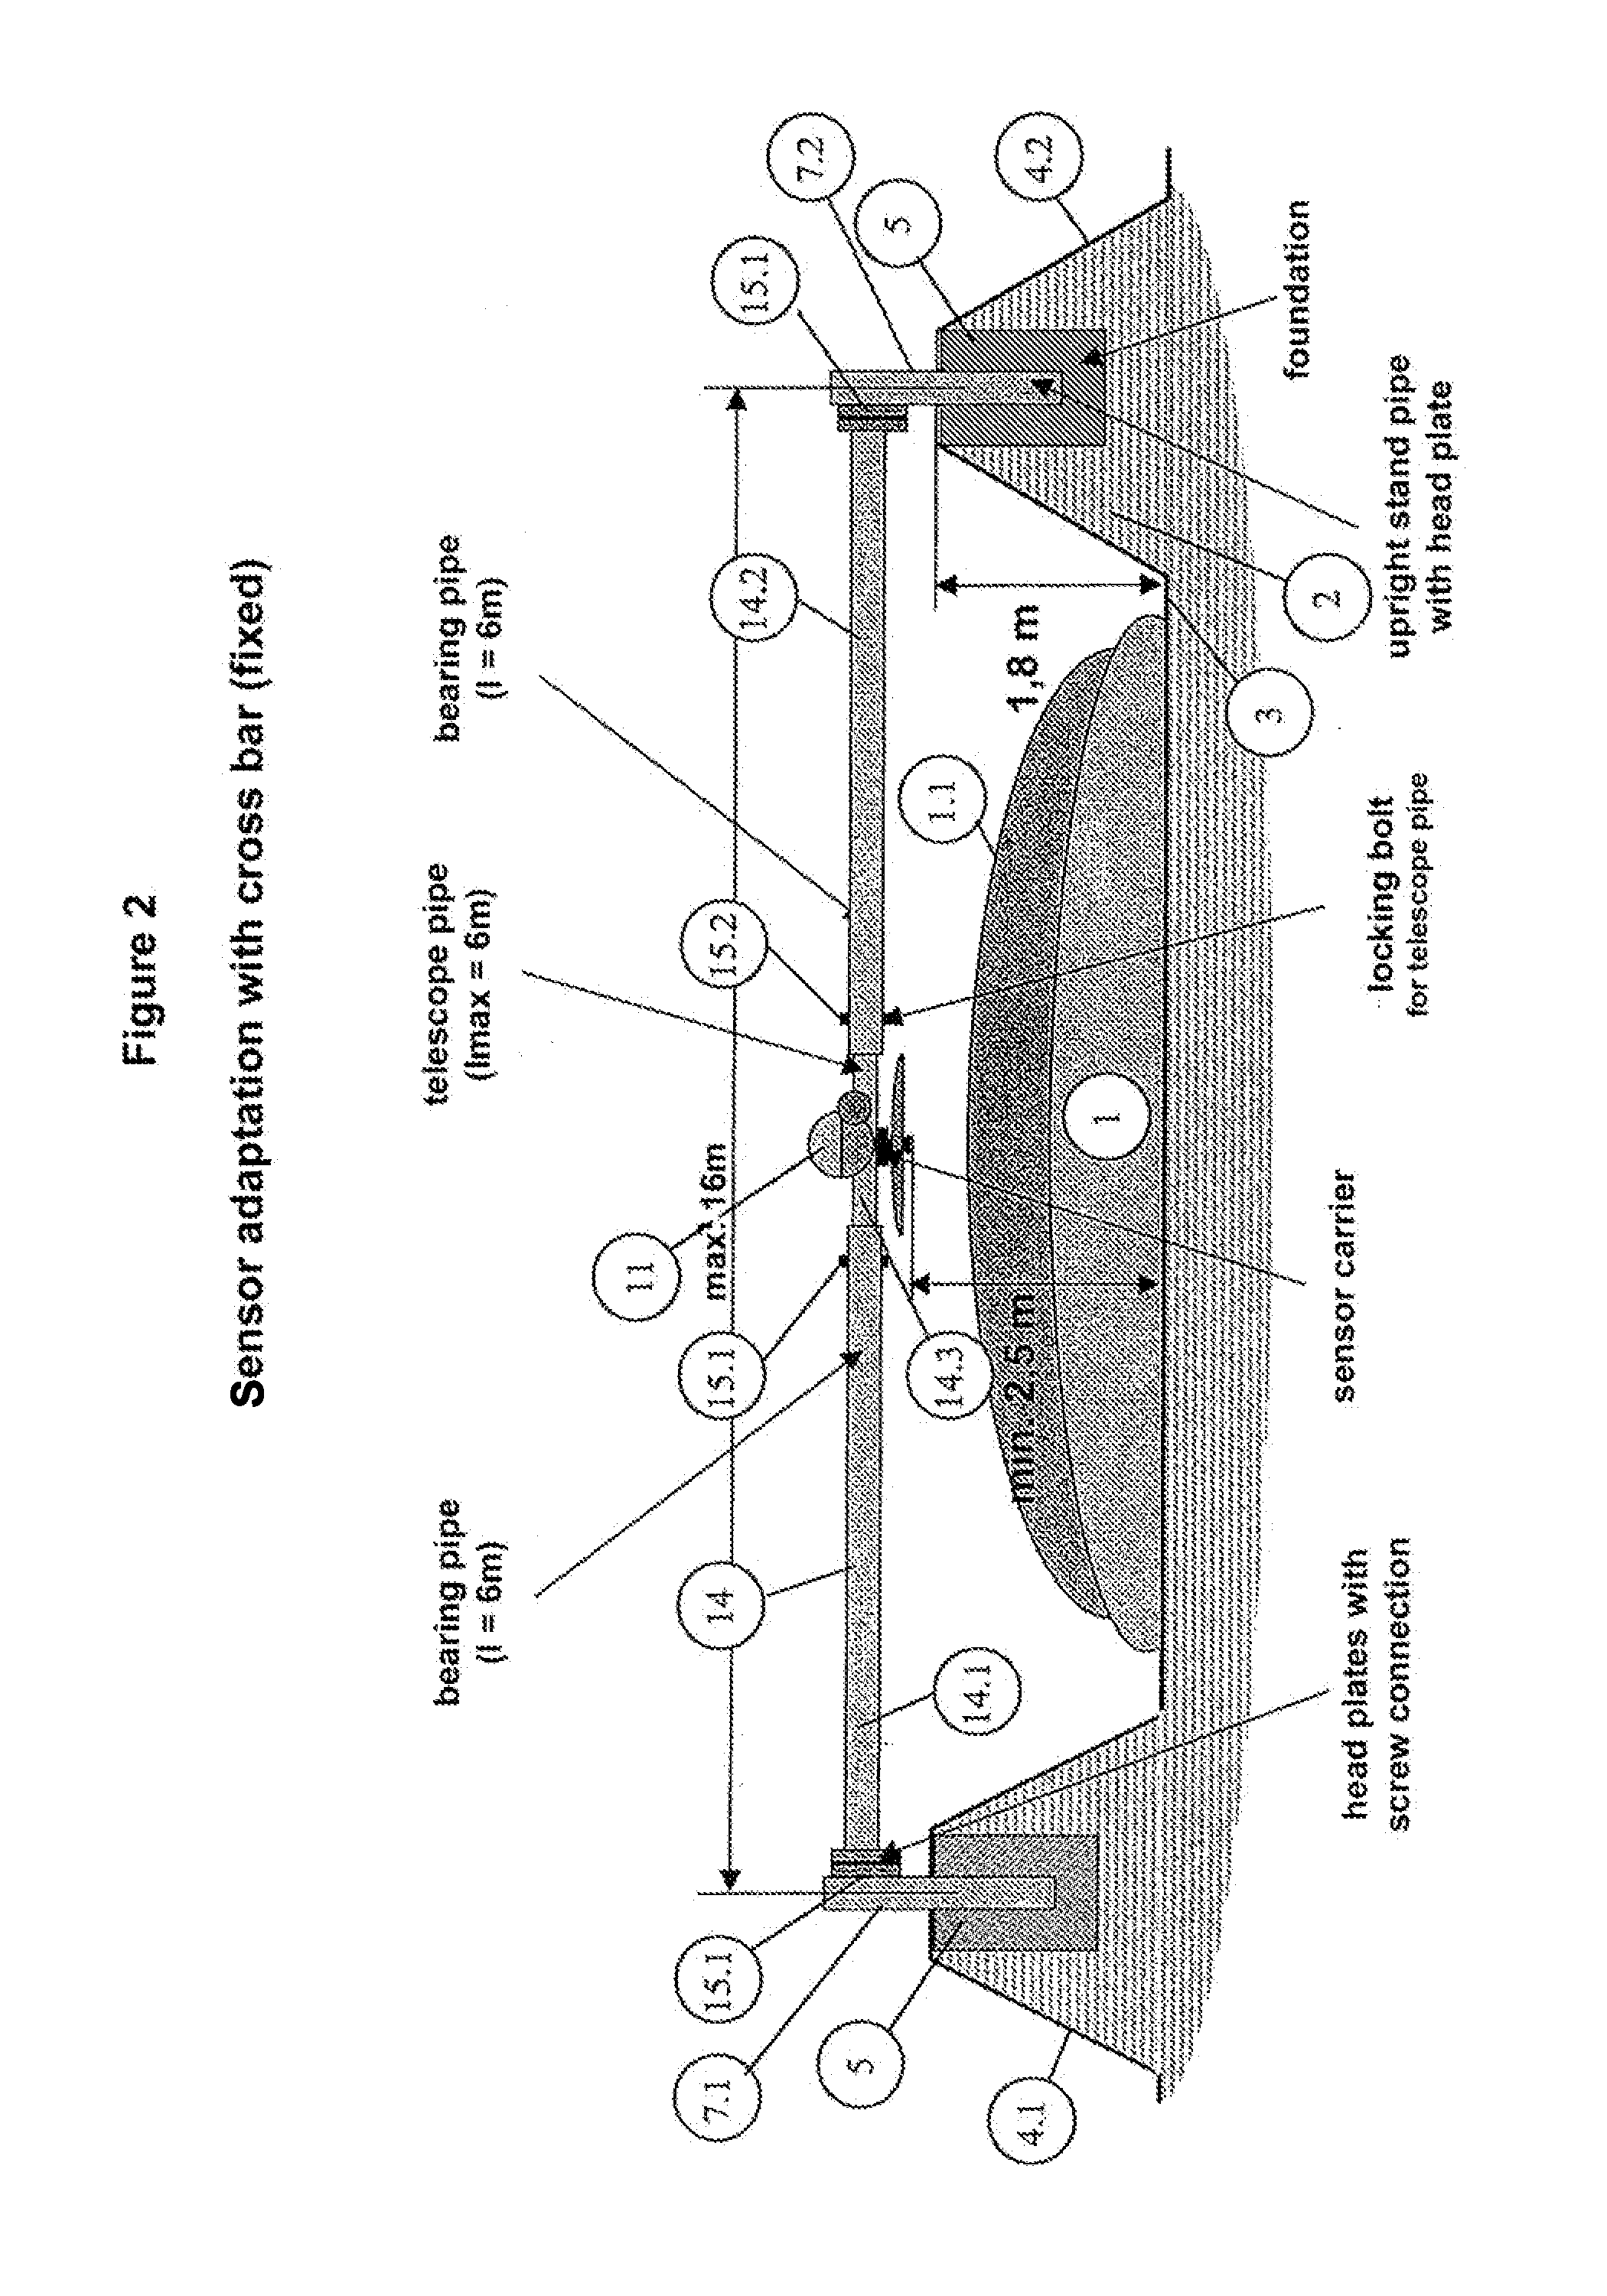 Apparatus and method for level measuring in a tank with flexible walls